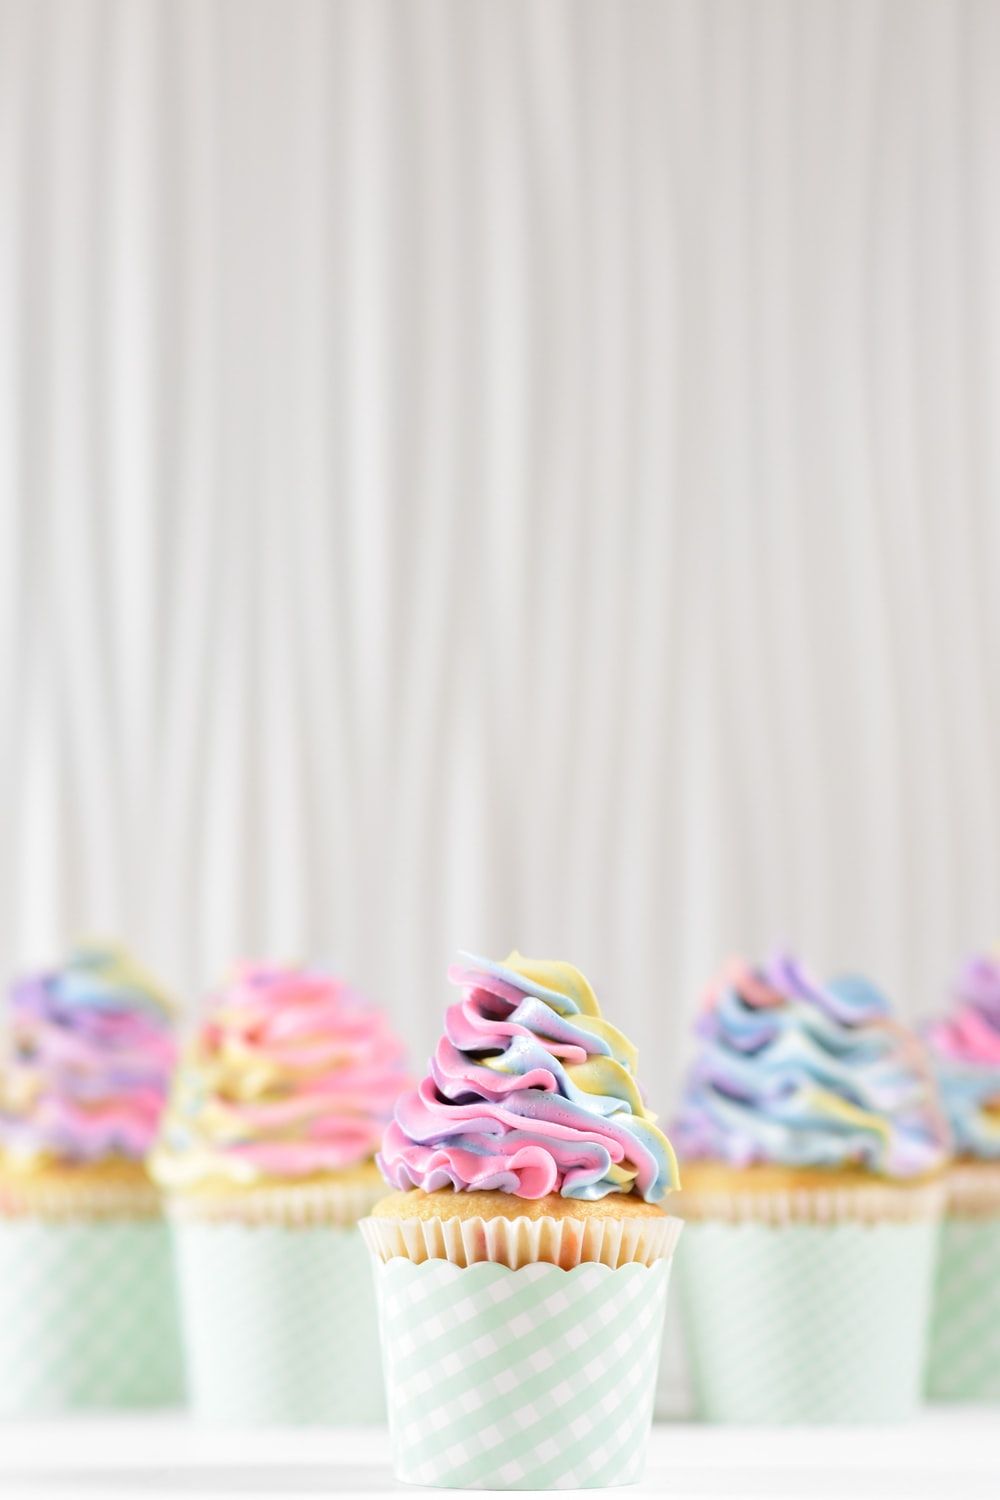 Cupcake Picture. Download Free Image